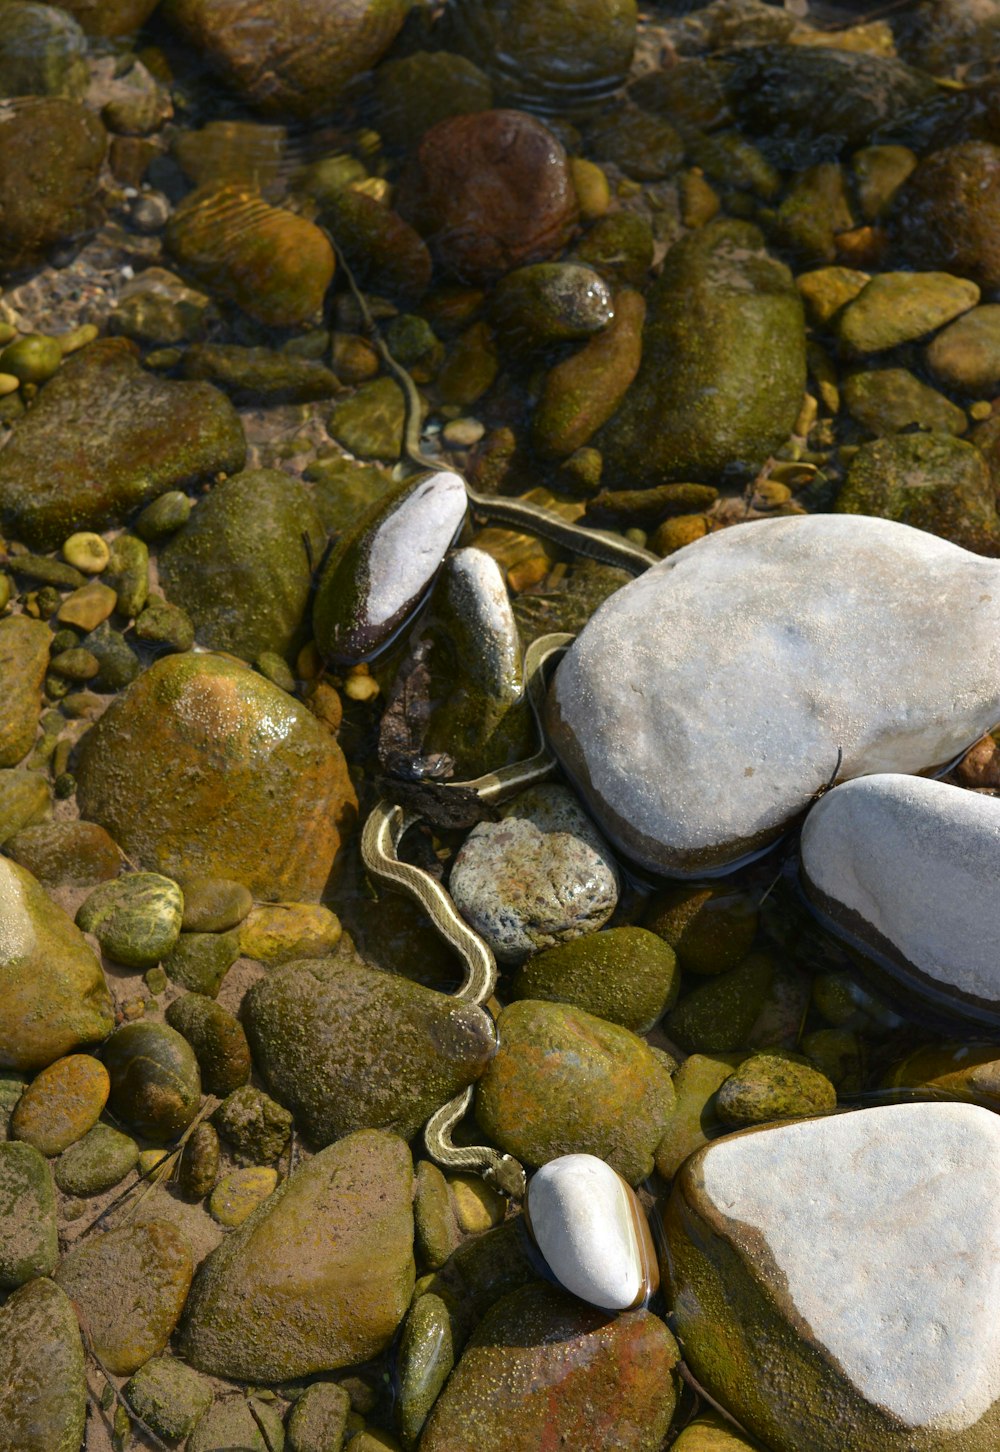 a snake crawling around rocks in the water